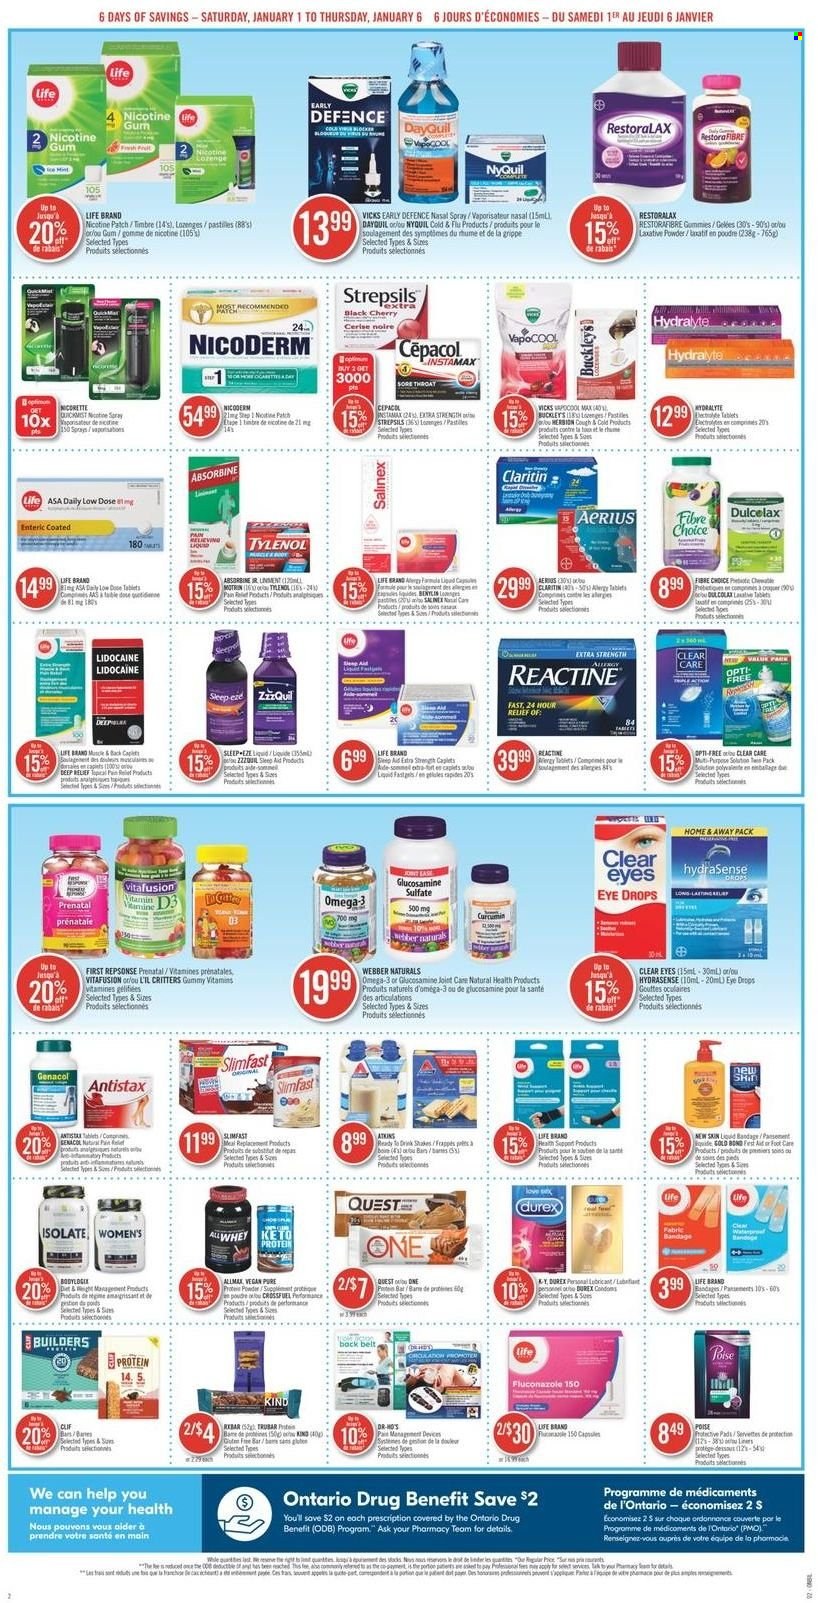 thumbnail - Shoppers Drug Mart Flyer - January 01, 2022 - January 06, 2022 - Sales products - Slimfast, tea, XTRA, Vicks, foot care, belt, Clear Care, Dulcolax, Cold & Flu, glucosamine, NicoDerm, Nicorette, nicotine therapy, Tylenol, Vitafusion, Prenatal, NyQuil, Omega-3, eye drops, Strepsils, vitamin D3, Low Dose, nasal spray, Motrin. Page 2.